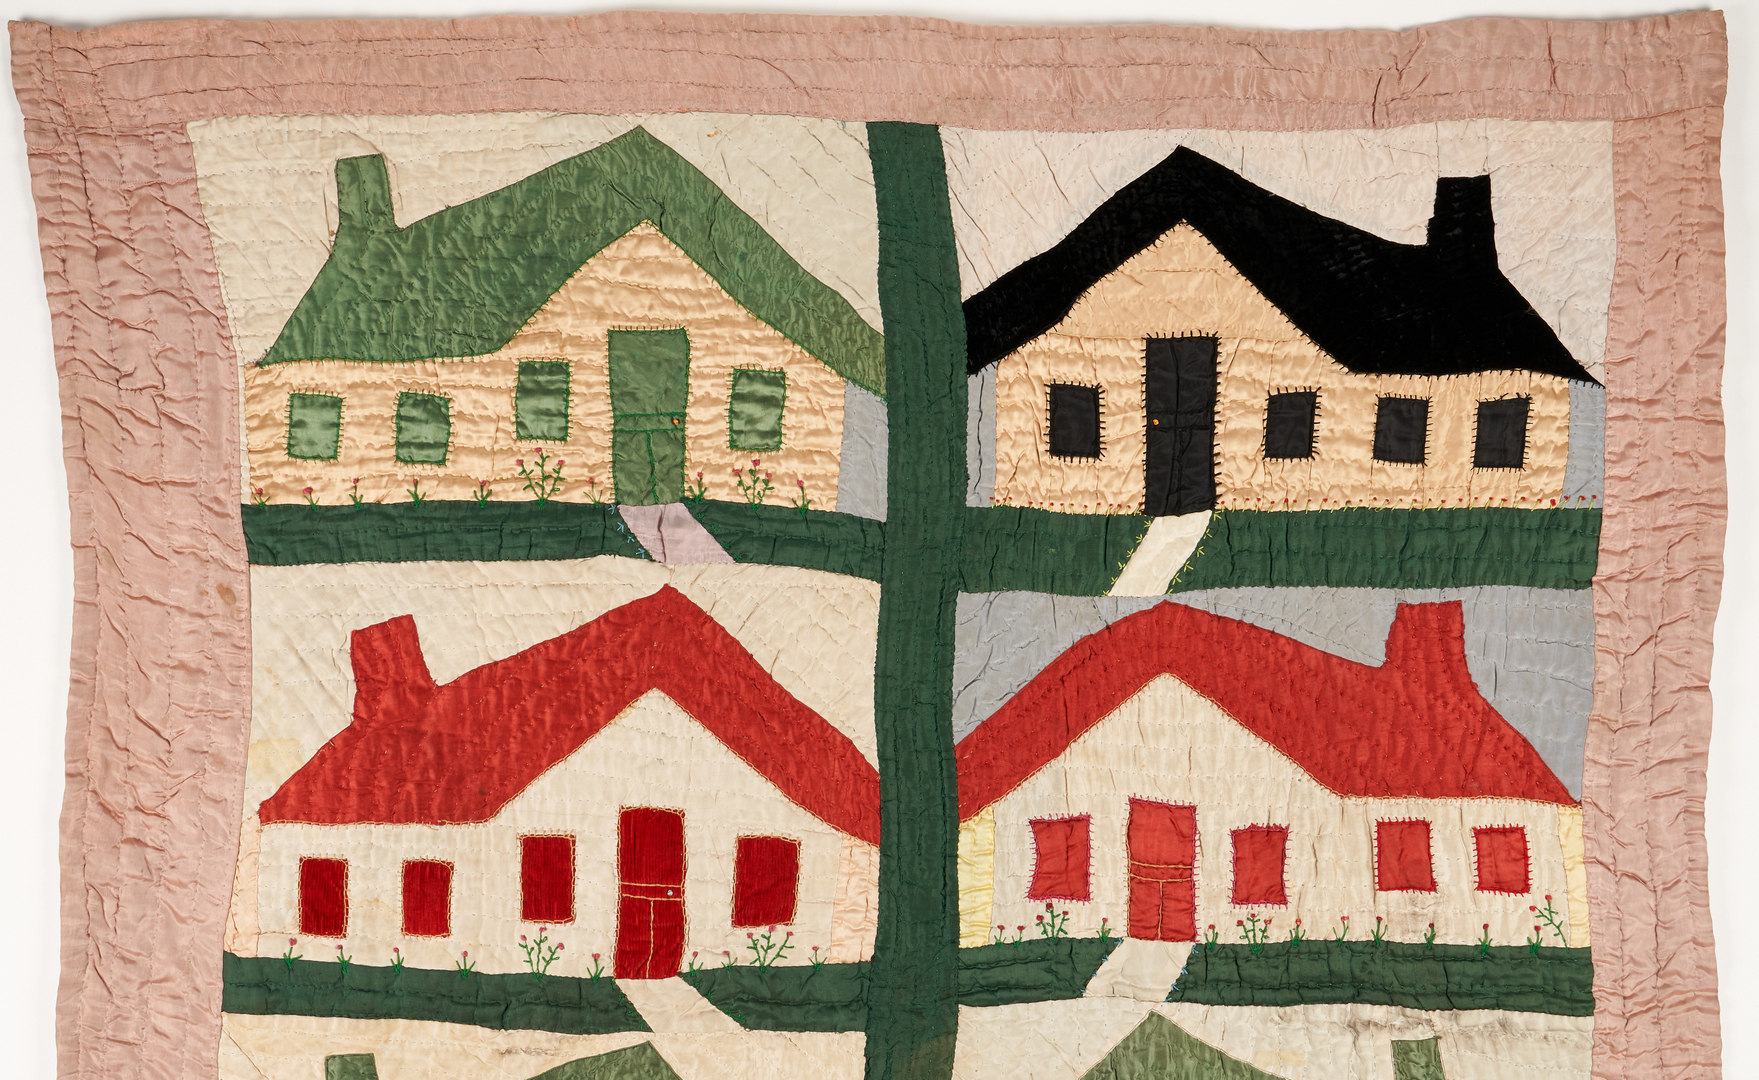 Lot 155: Exhibited African-American Schoolhouse Quilt